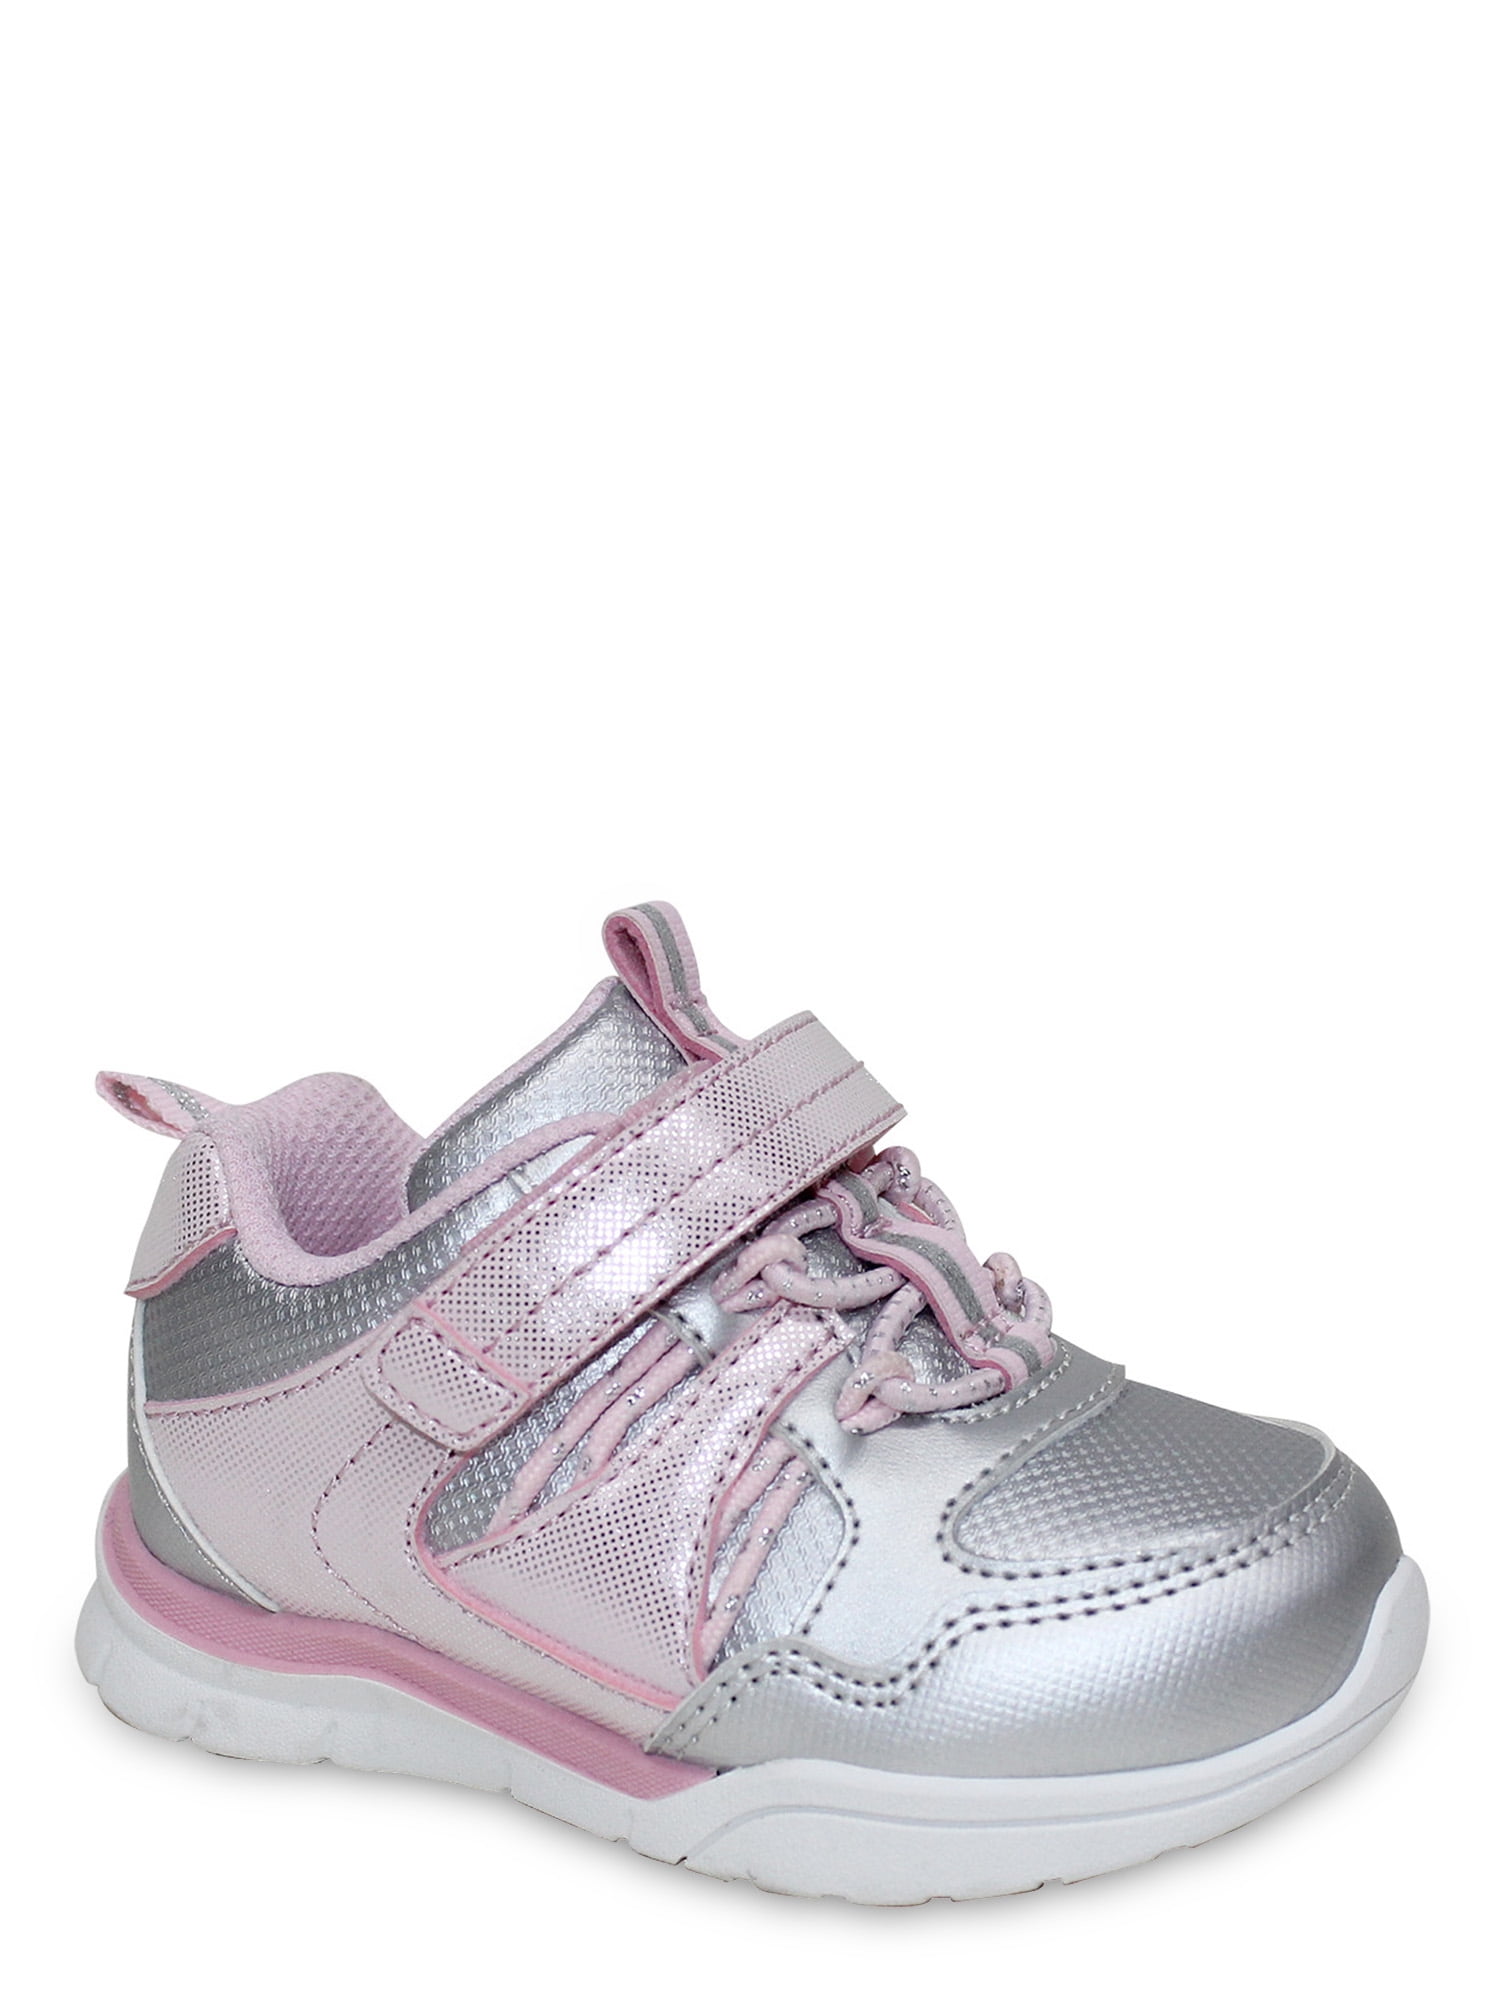 JUMPING BEANS ATHLETIC SNEAKERS PINK PURPLE SILVER SHOES GIRLS SZ 2 OR 3 